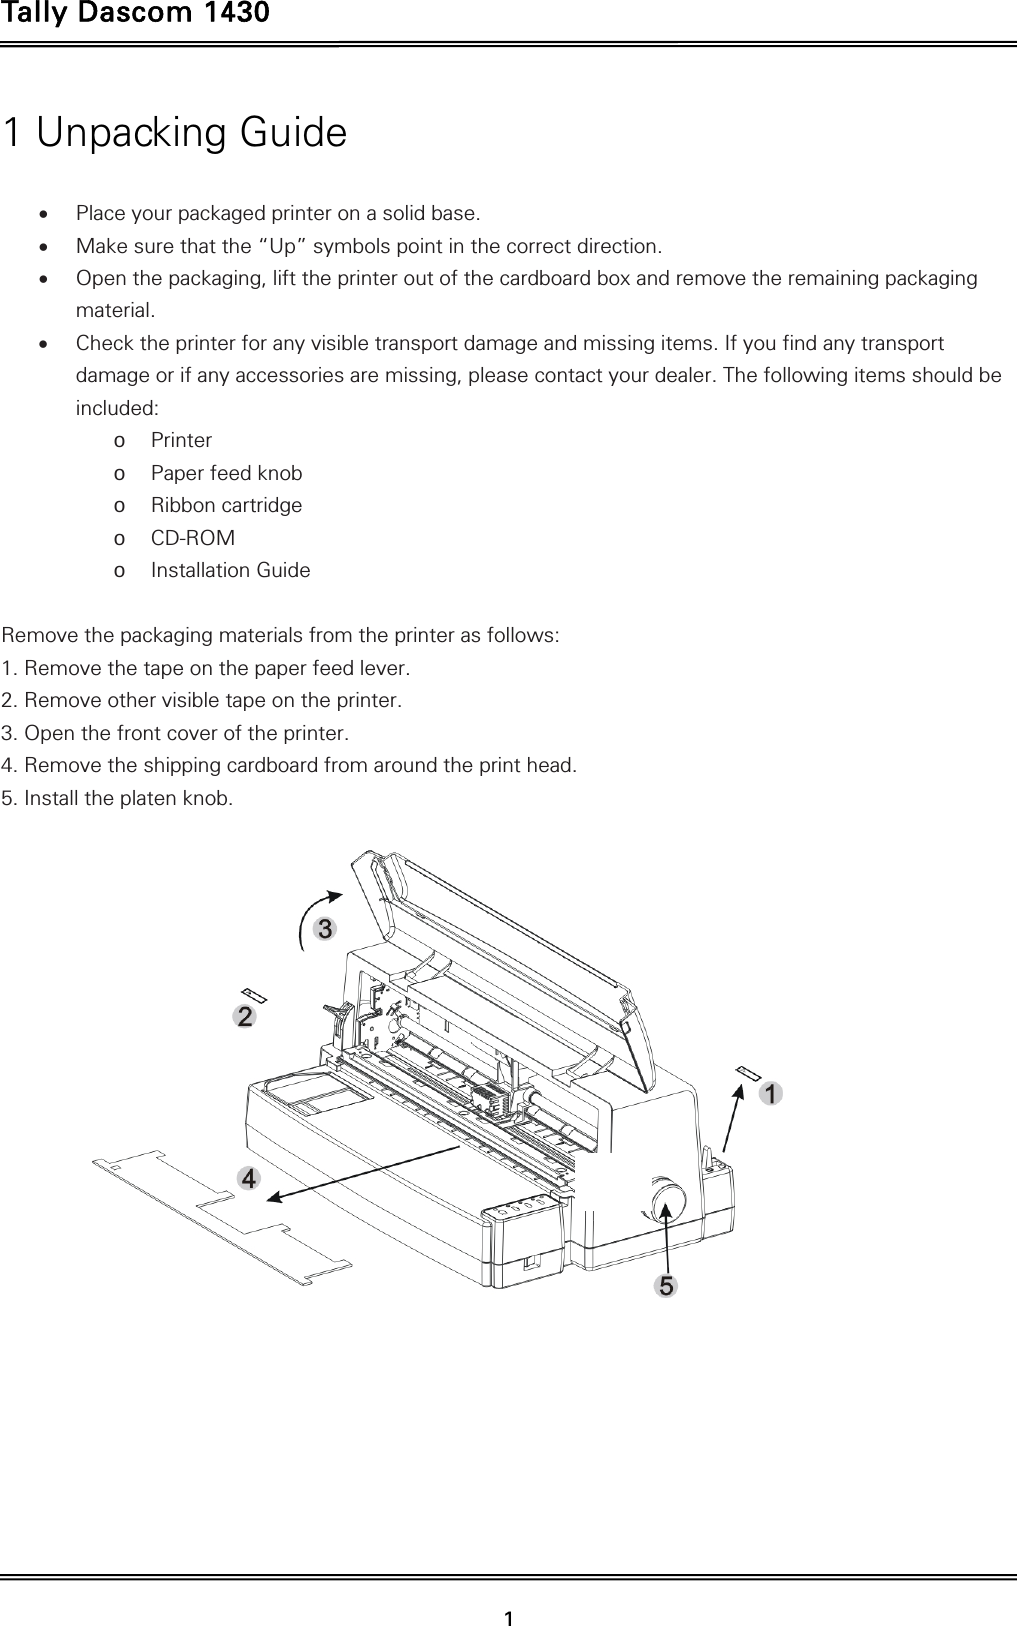 Tally Dascom 1430   1  1 Unpacking Guide   Place your packaged printer on a solid base.  Make sure that the “Up” symbols point in the correct direction.  Open the packaging, lift the printer out of the cardboard box and remove the remaining packaging material.  Check the printer for any visible transport damage and missing items. If you find any transport damage or if any accessories are missing, please contact your dealer. The following items should be included: o Printer o Paper feed knob o Ribbon cartridge o CD-ROM o Installation Guide  Remove the packaging materials from the printer as follows: 1. Remove the tape on the paper feed lever. 2. Remove other visible tape on the printer.   3. Open the front cover of the printer. 4. Remove the shipping cardboard from around the print head. 5. Install the platen knob.      